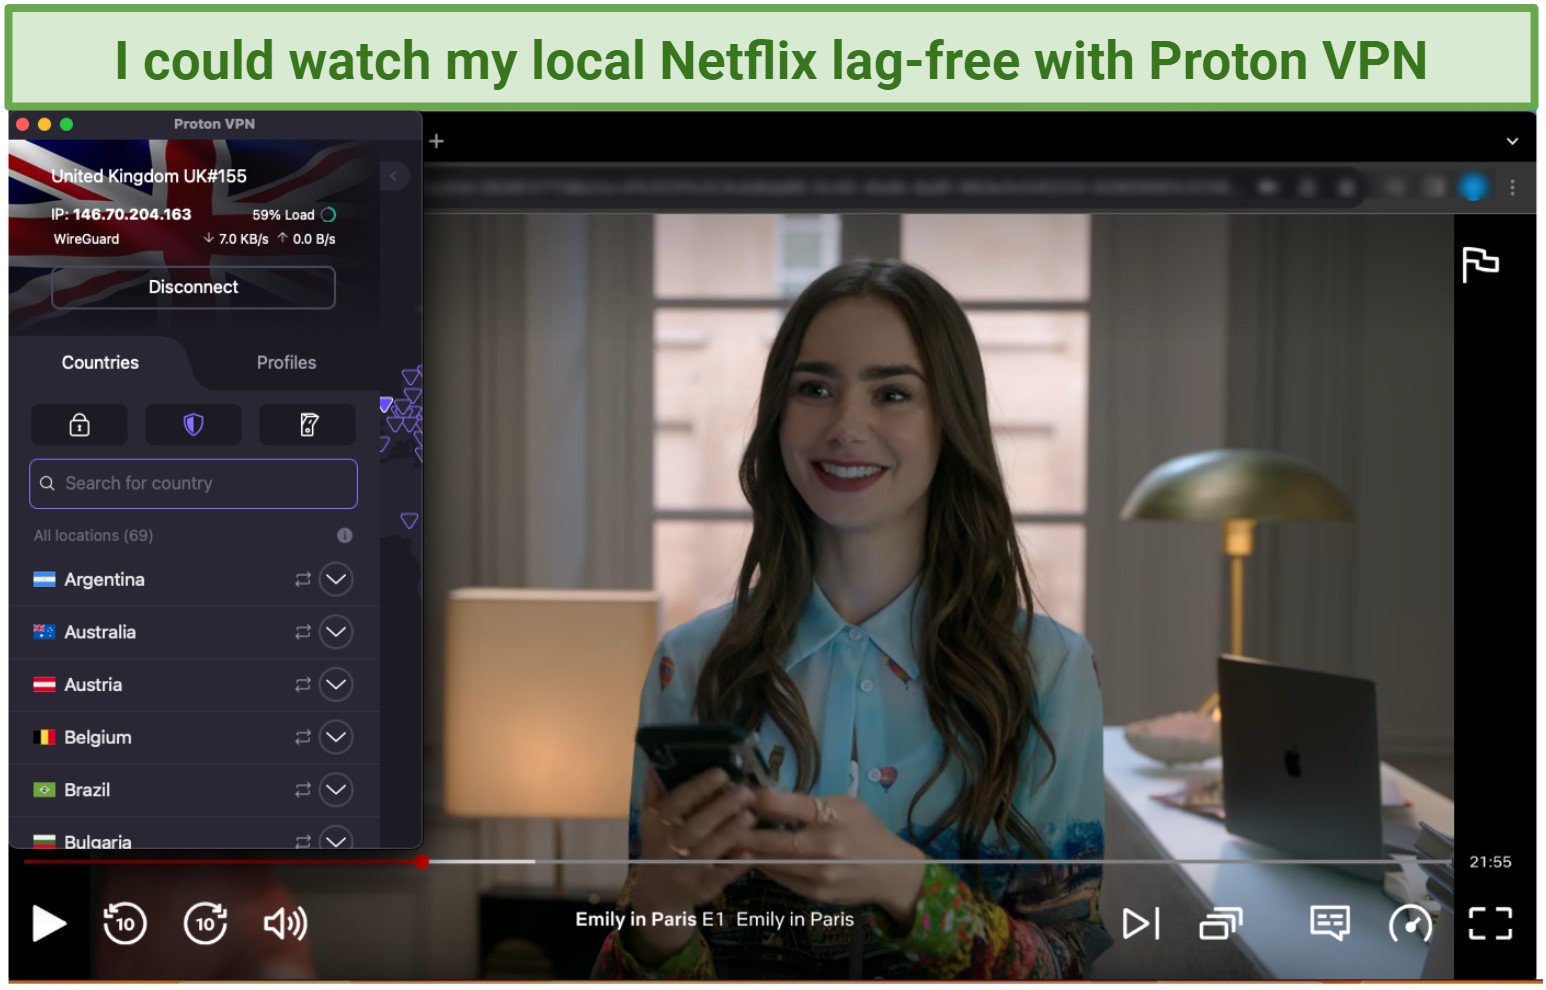 Using Proton VPN's UK streaming optimized server to watch Netflix from the UK.